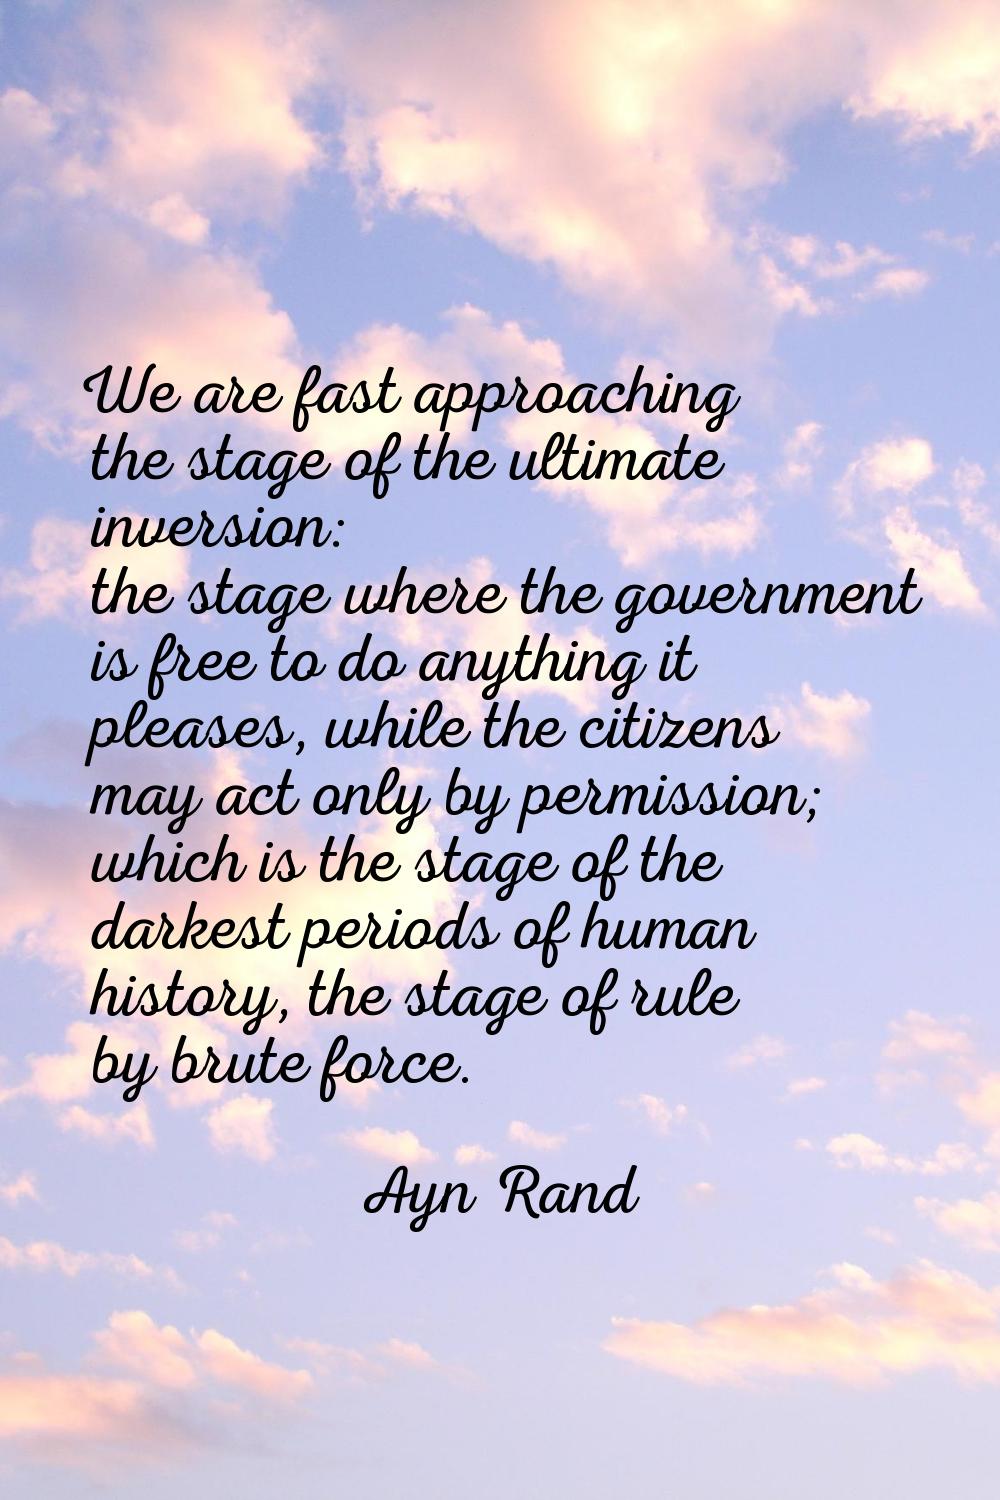 We are fast approaching the stage of the ultimate inversion: the stage where the government is free